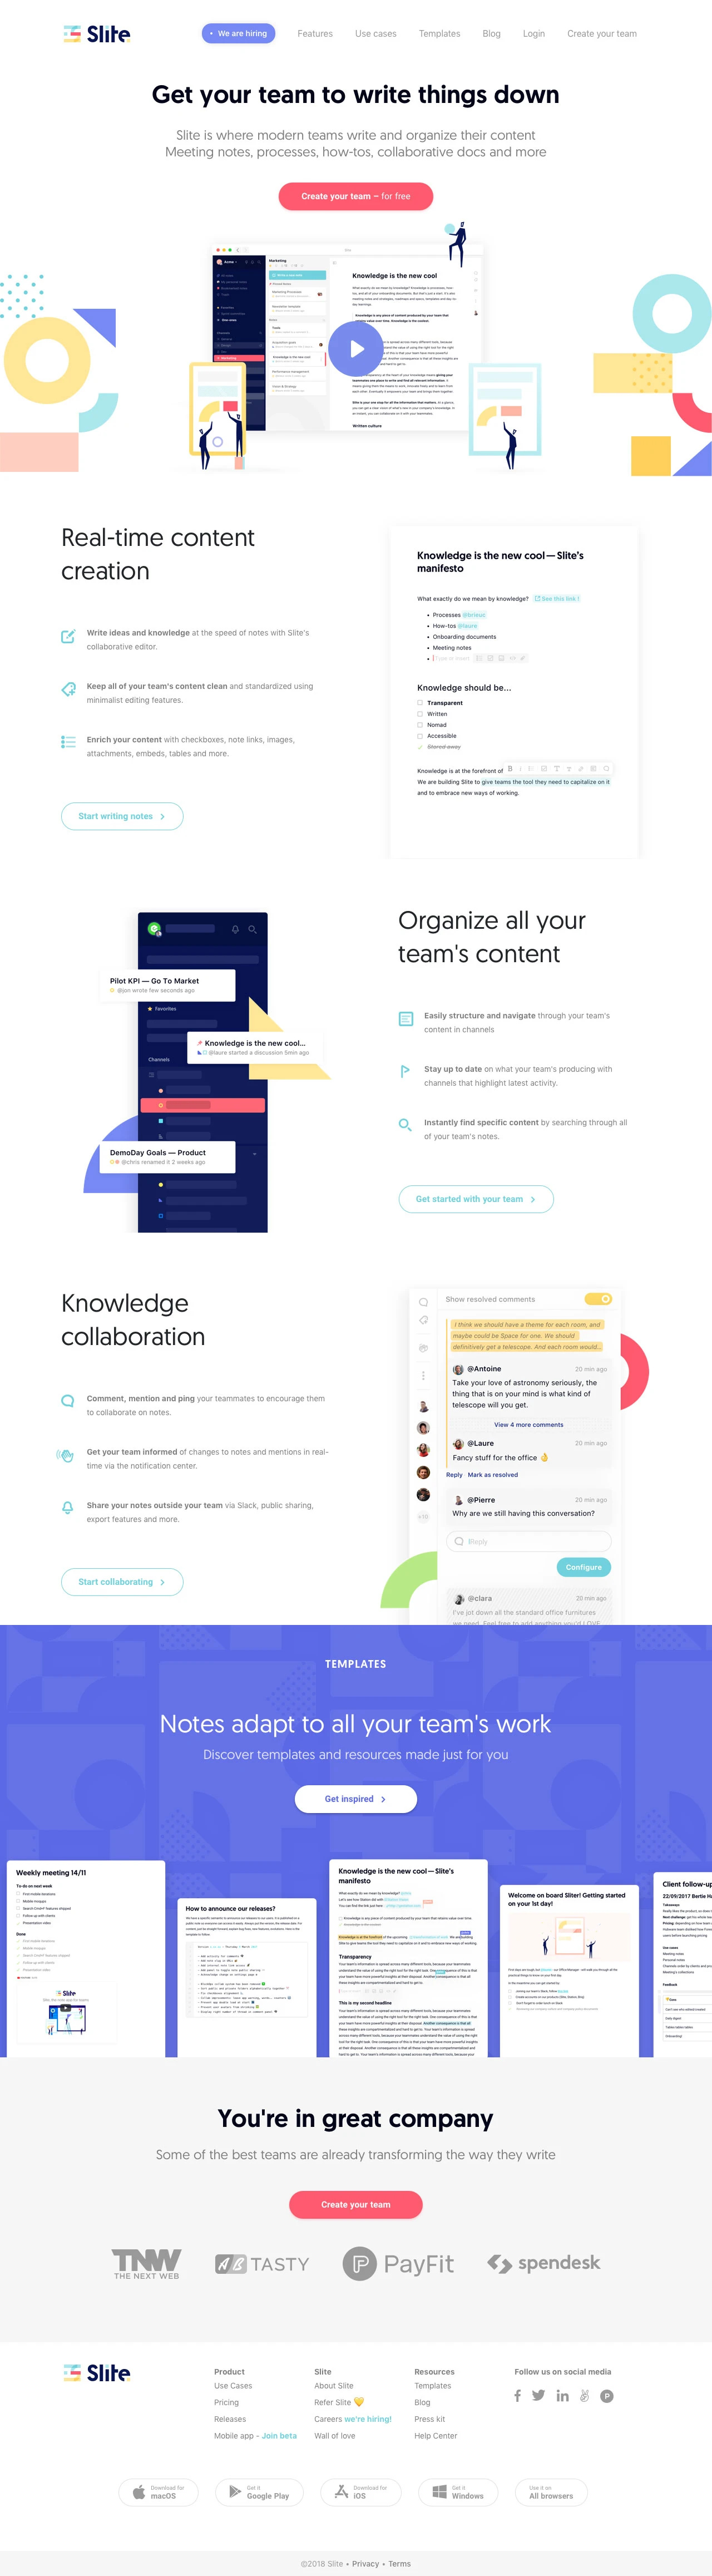 Slite Landing Page Example: Slite is where modern teams write and organize their content Meeting notes, processes, how-tos, collaborative docs and more